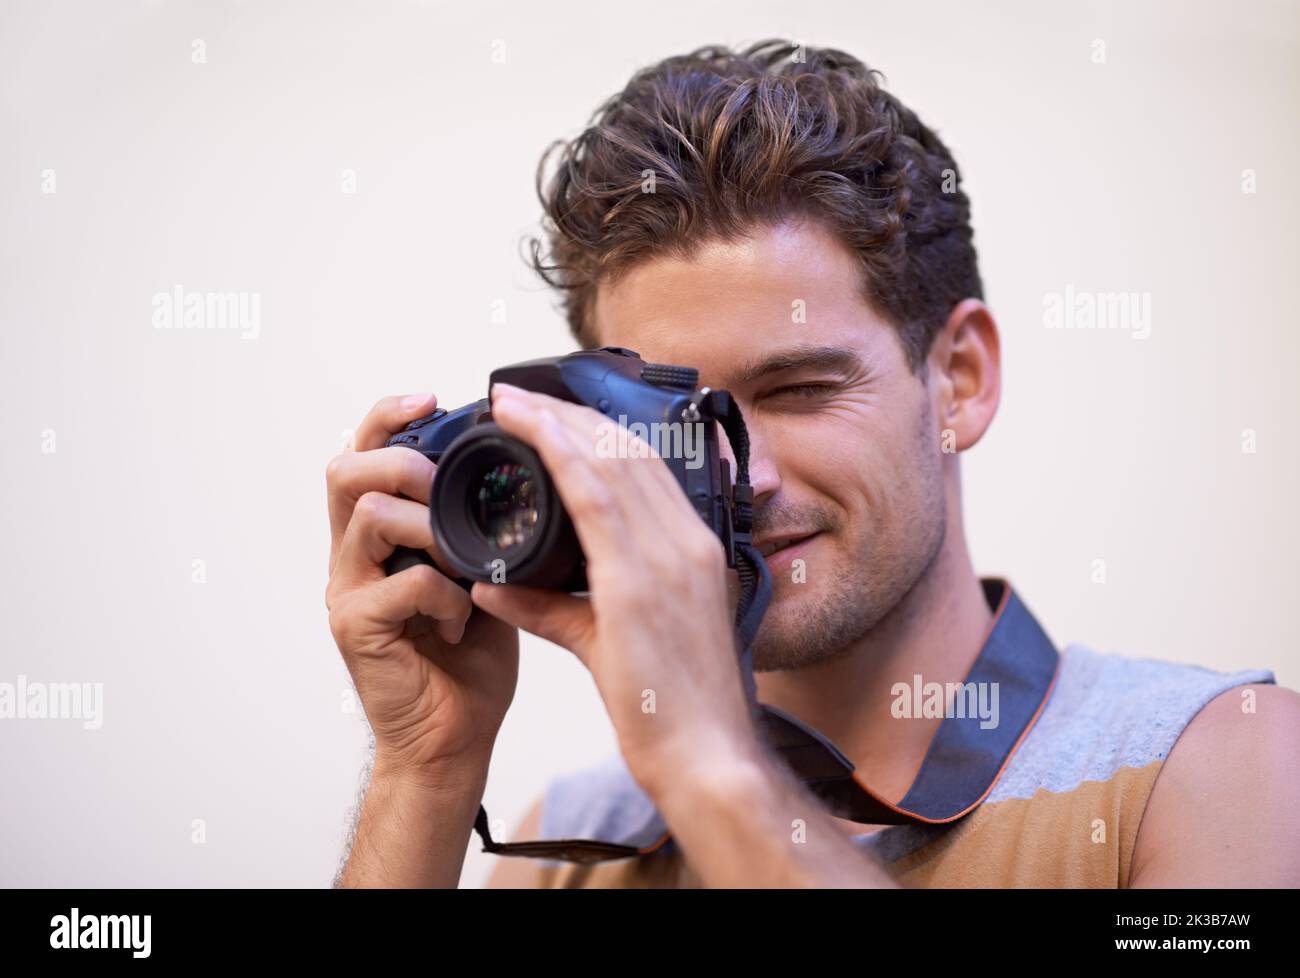 Photography is my favorite pastime. a young man taking a photograph outside. Stock Photo